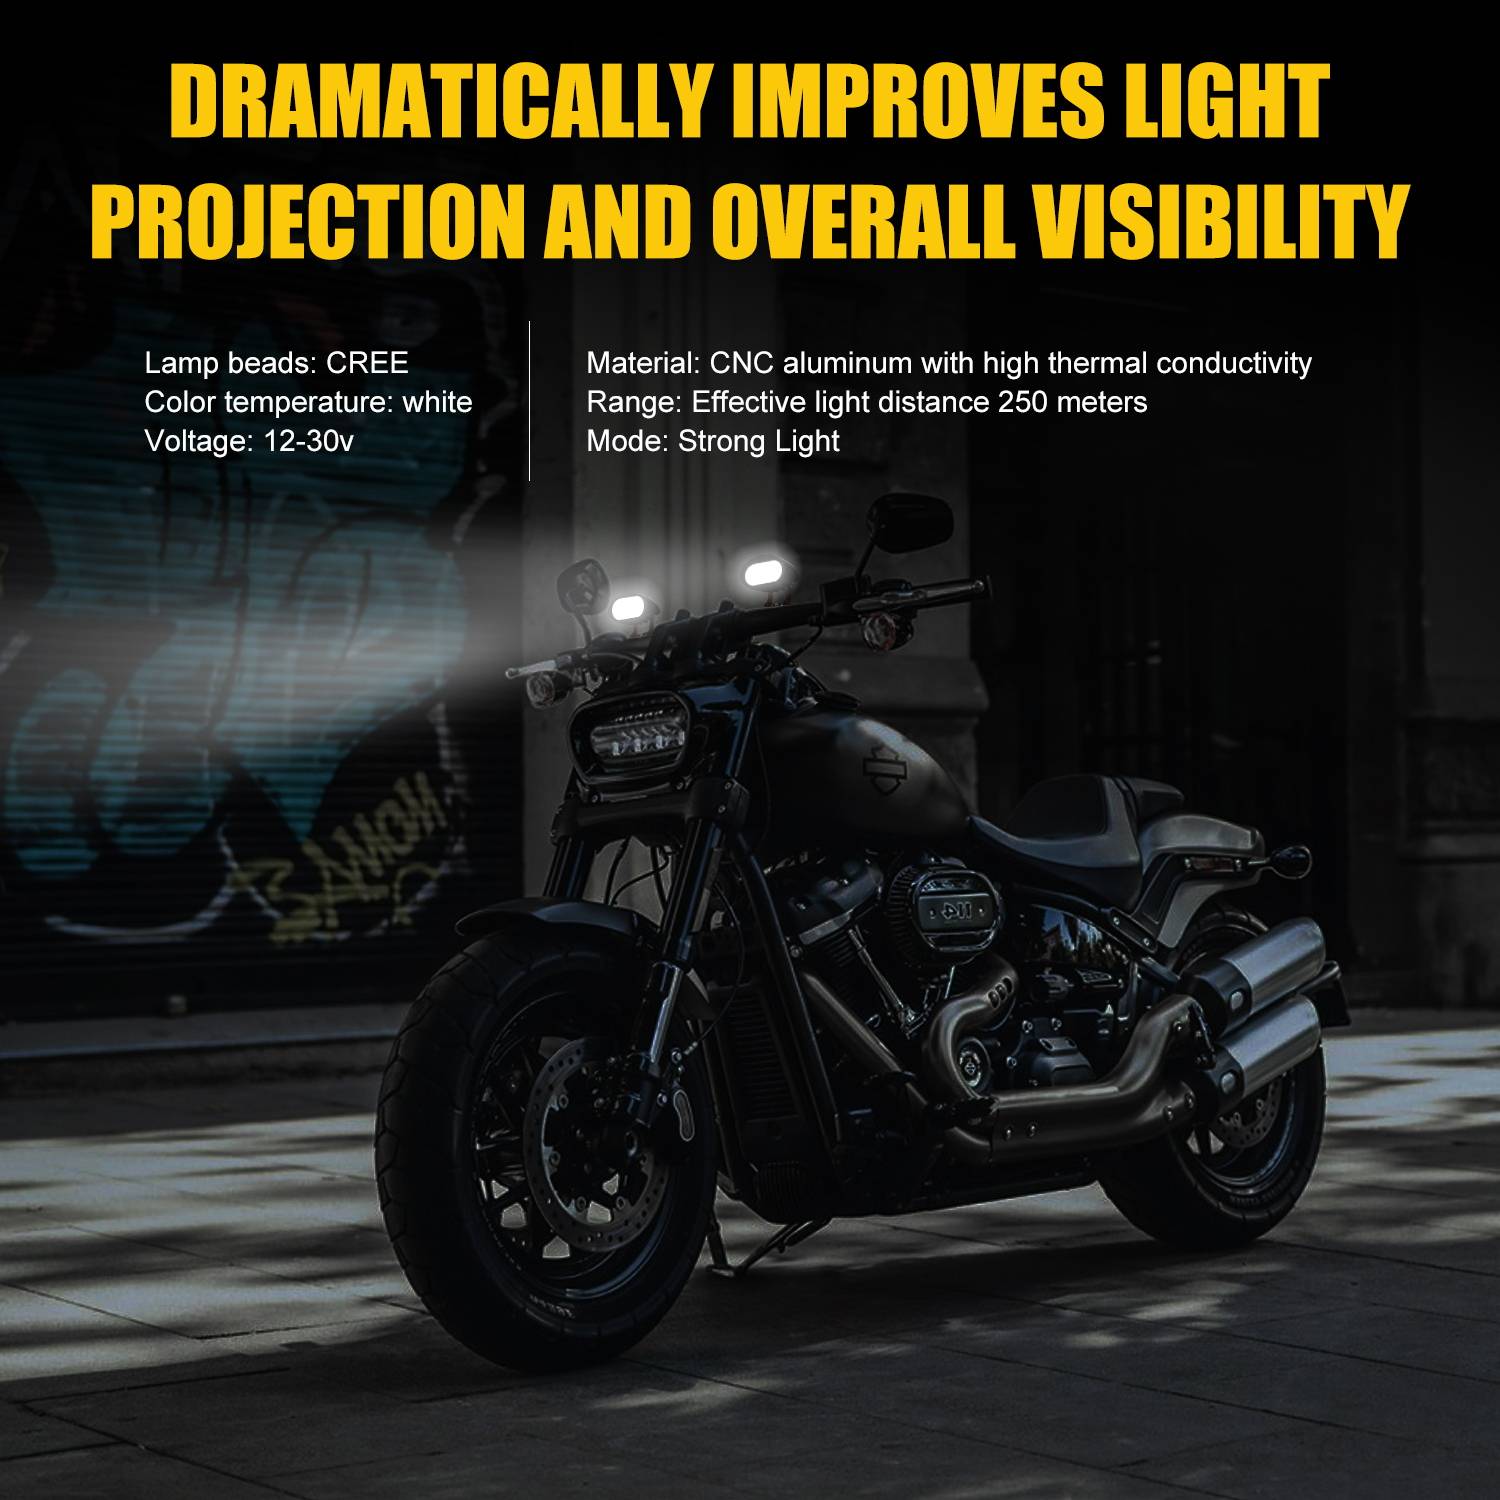 9-30v DC Led Motorcycle Auxiliary Lights Bulbs Motobike Accessories Light Motorcycle Lighting System